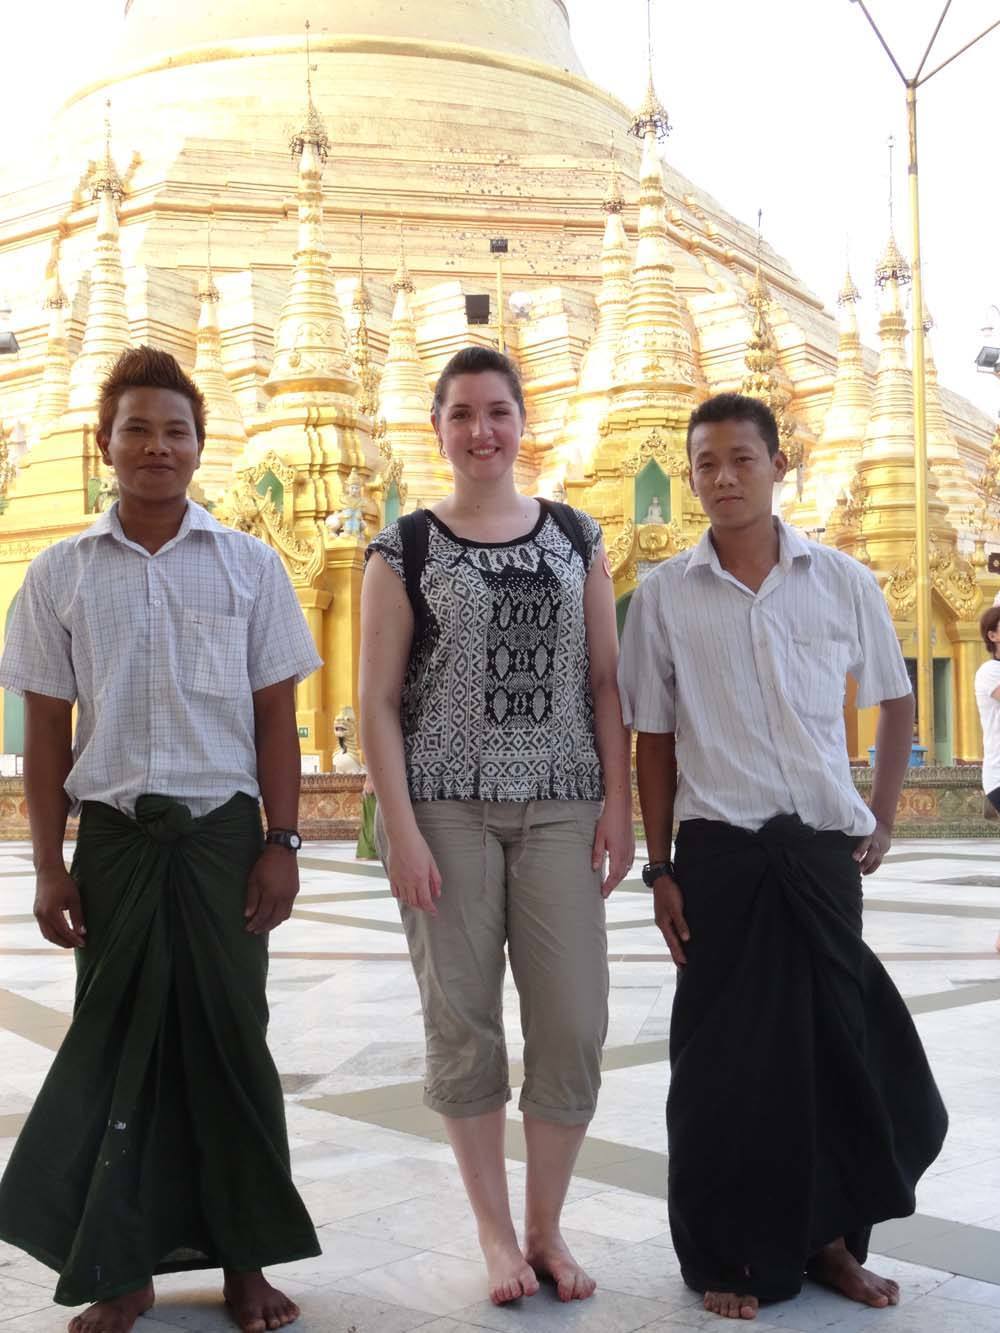 Our Enfys demonstrating appropriate dress at Shwedagon Pagoda.